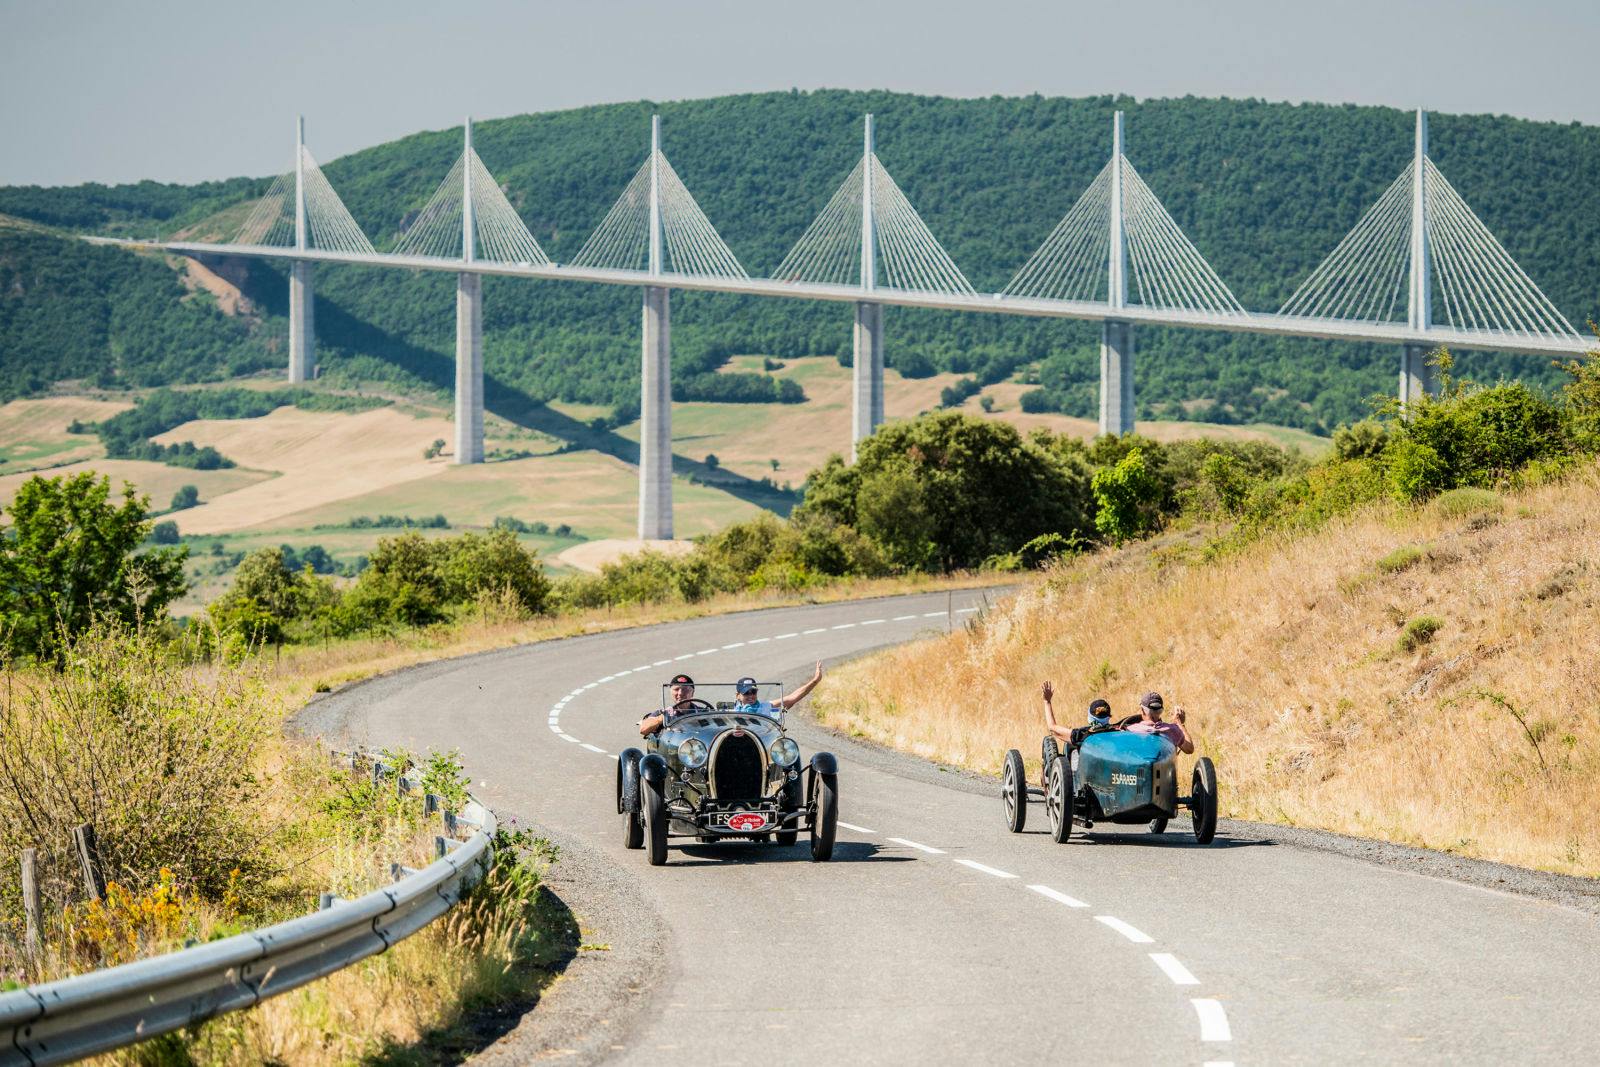 The Bugatti Type 35 is one of the most successful racing cars of all time.
